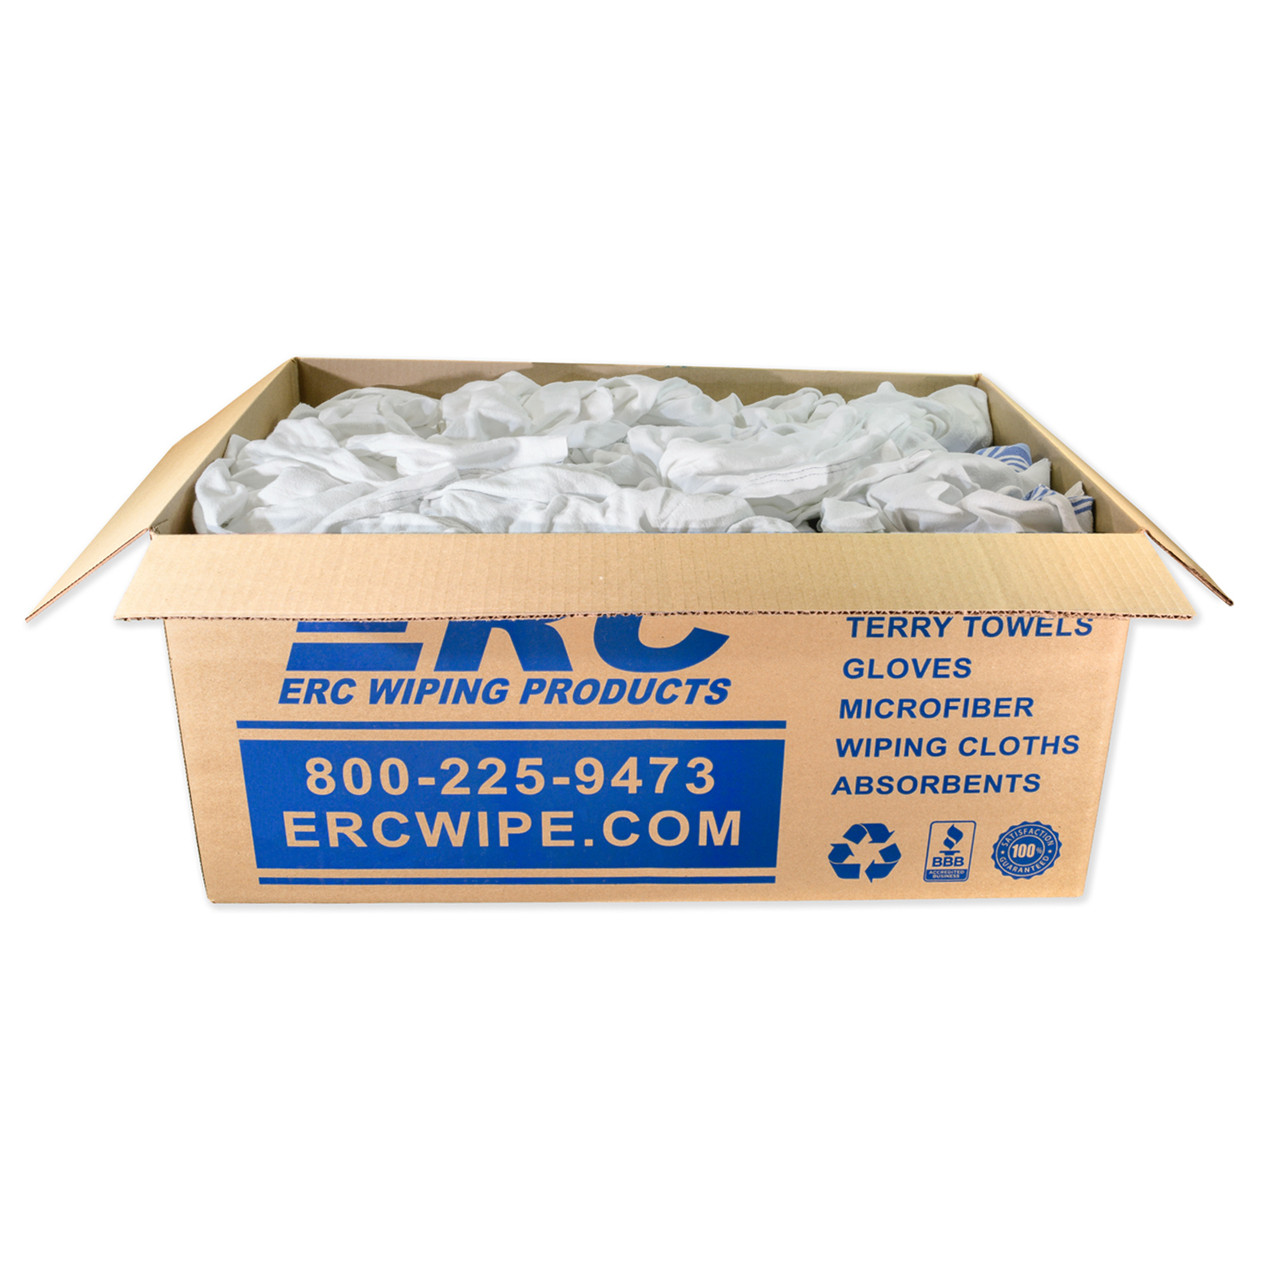 https://cdn11.bigcommerce.com/s-a5uwe4c7wz/images/stencil/1280x1280/products/861/2069/Thermal-Rags-Bulk-Recycled-White-25-Lb-Box__29326.1618496446.jpg?c=1